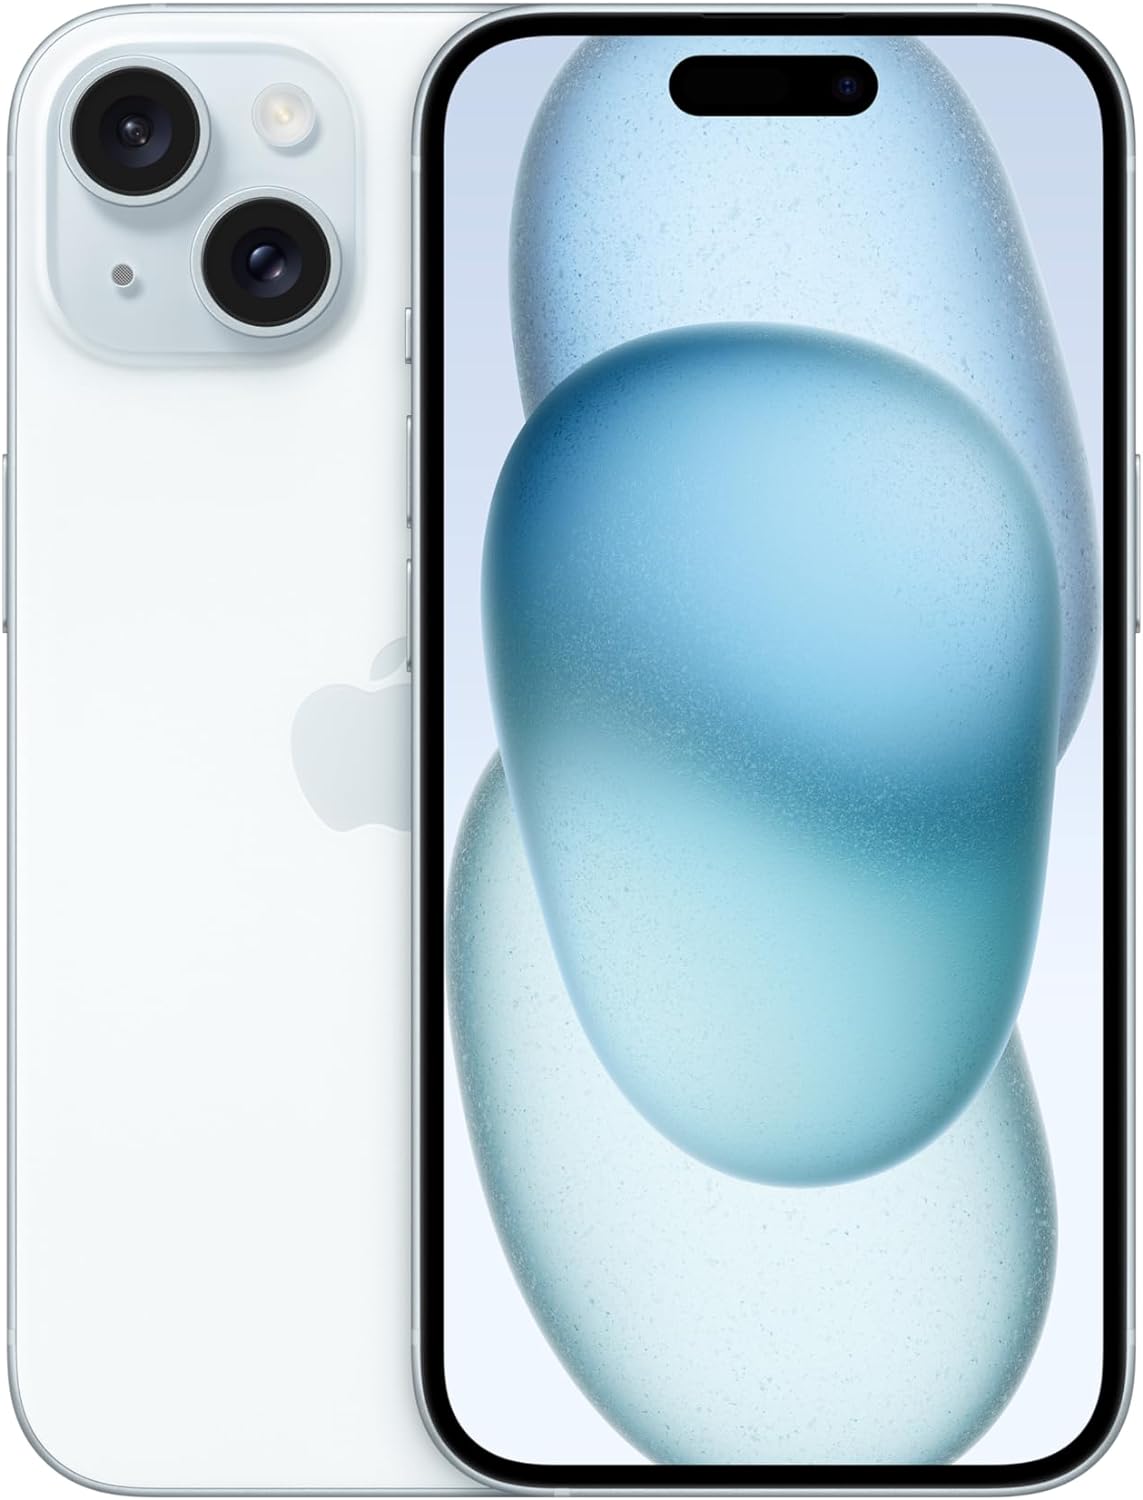 Apple iPhone 15 (512 GB) - Blue: Dynamic Island alerts and Live Activities keep you connected on the go. 0195949038242